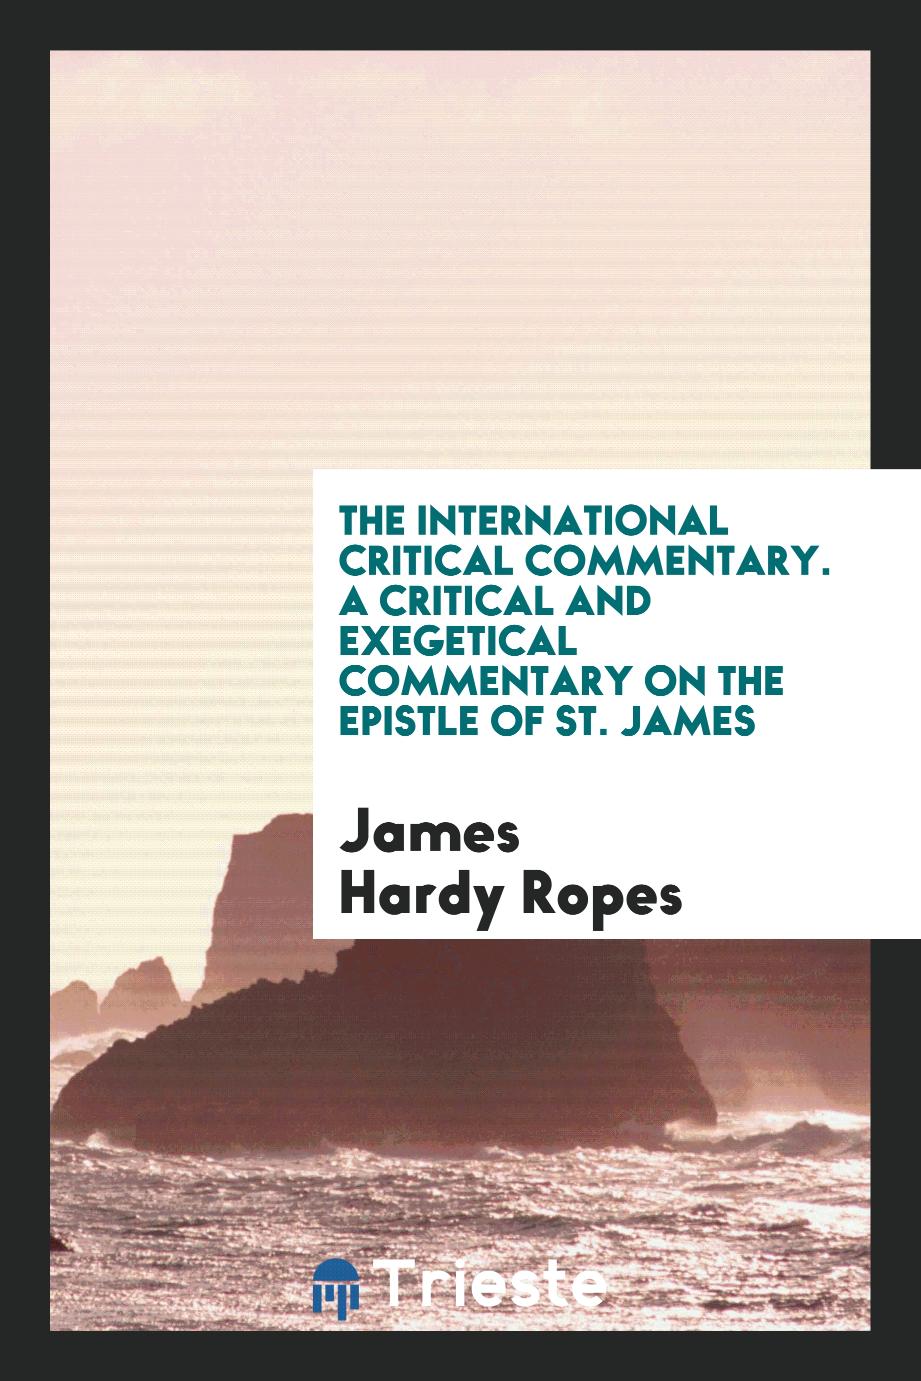 The International Critical Commentary. A Critical and Exegetical Commentary on the Epistle of St. James